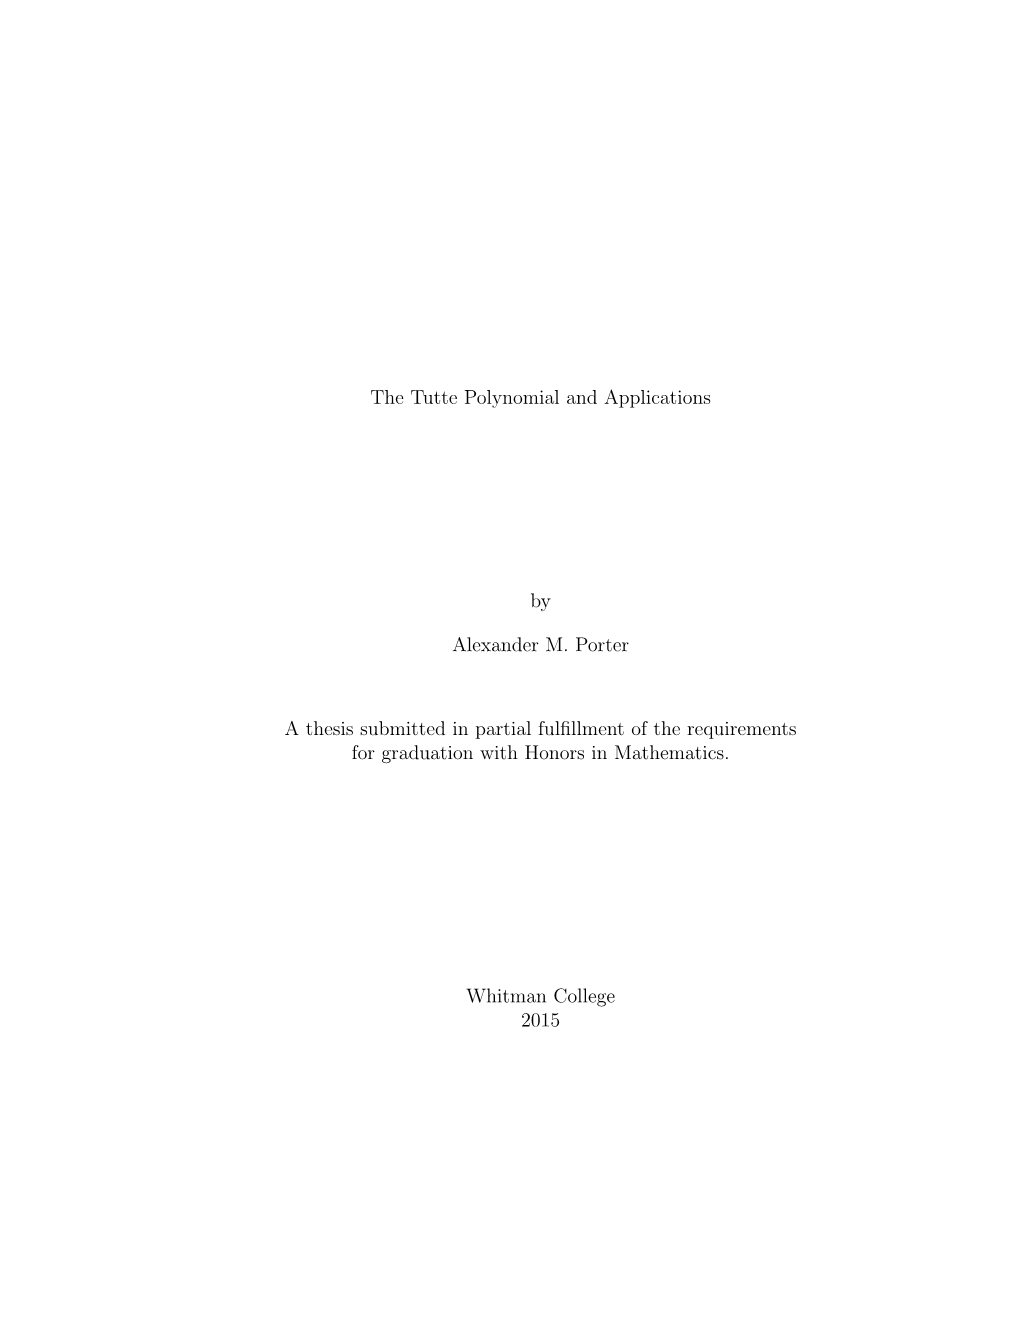 The Tutte Polynomial and Applications by Alexander M. Porter a Thesis